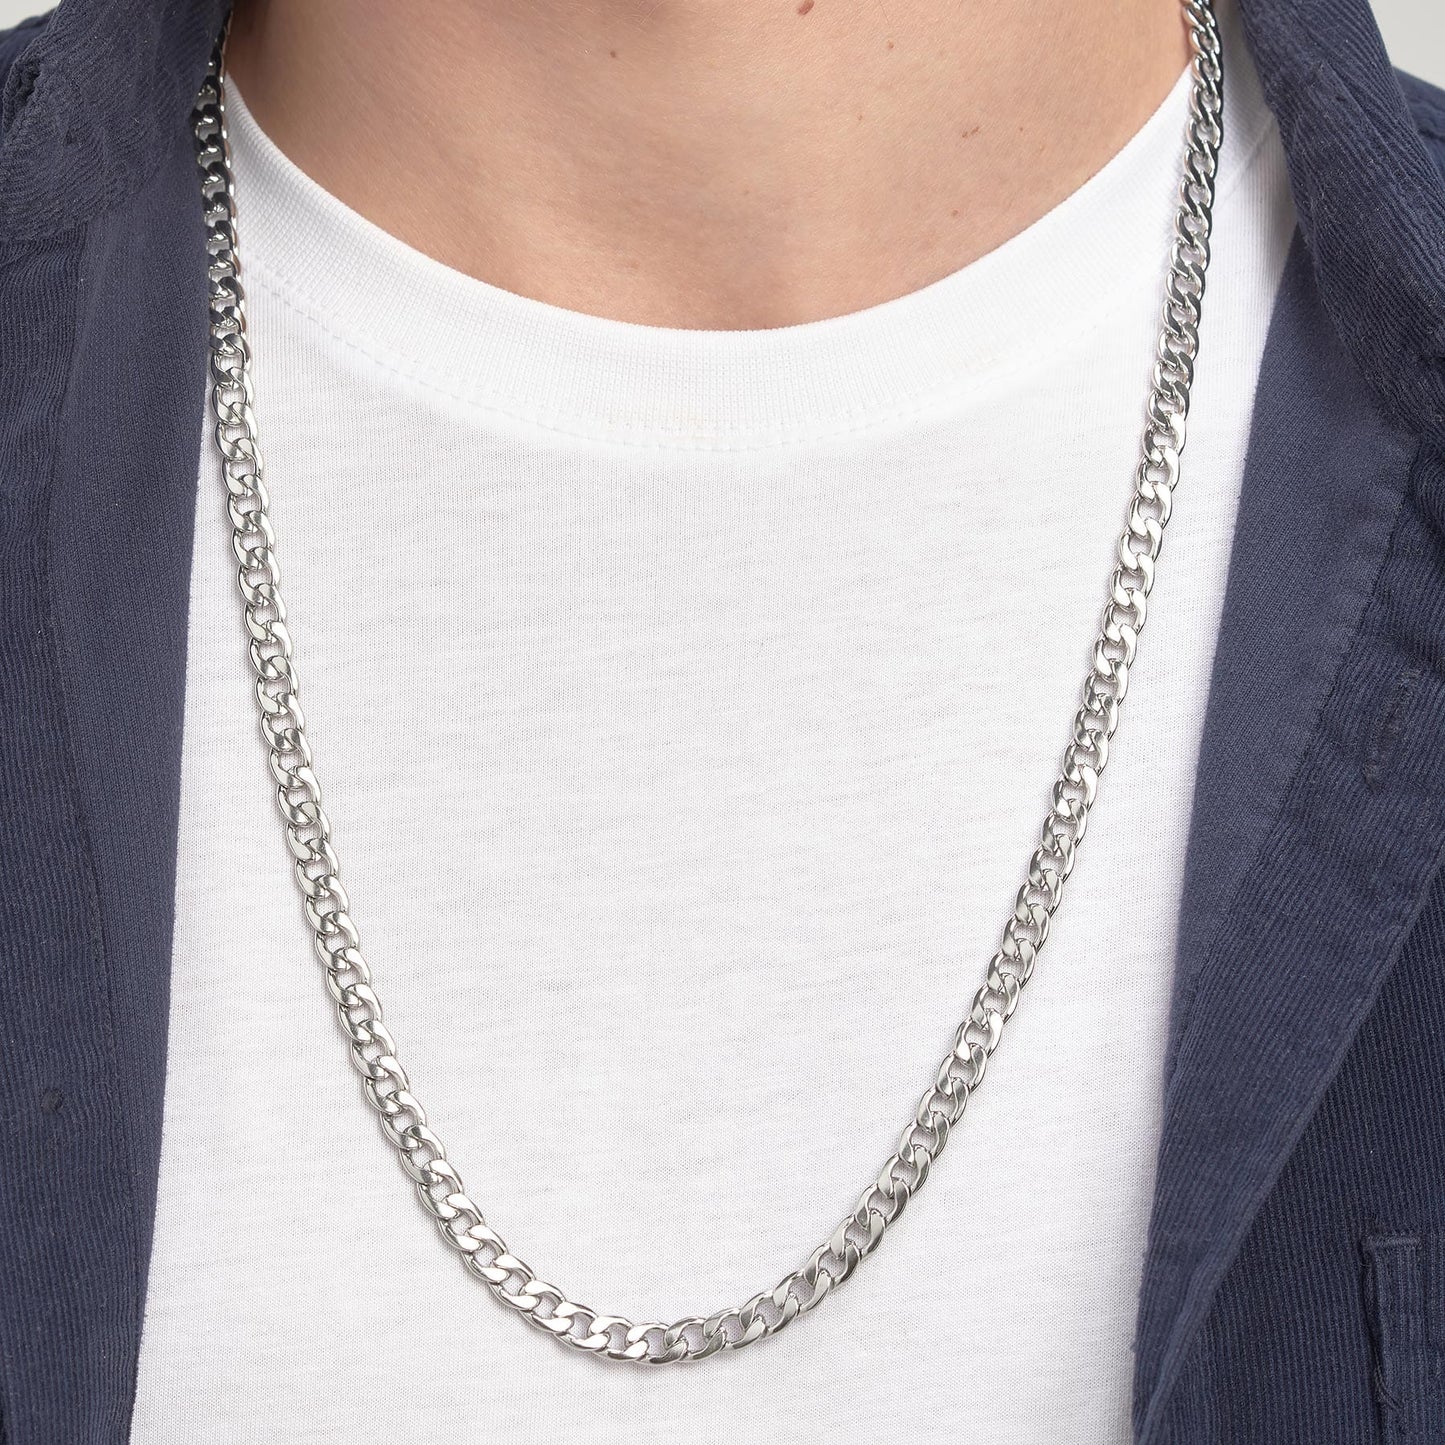 NKL-SS Stainless Steel Long Curb Chain Necklace